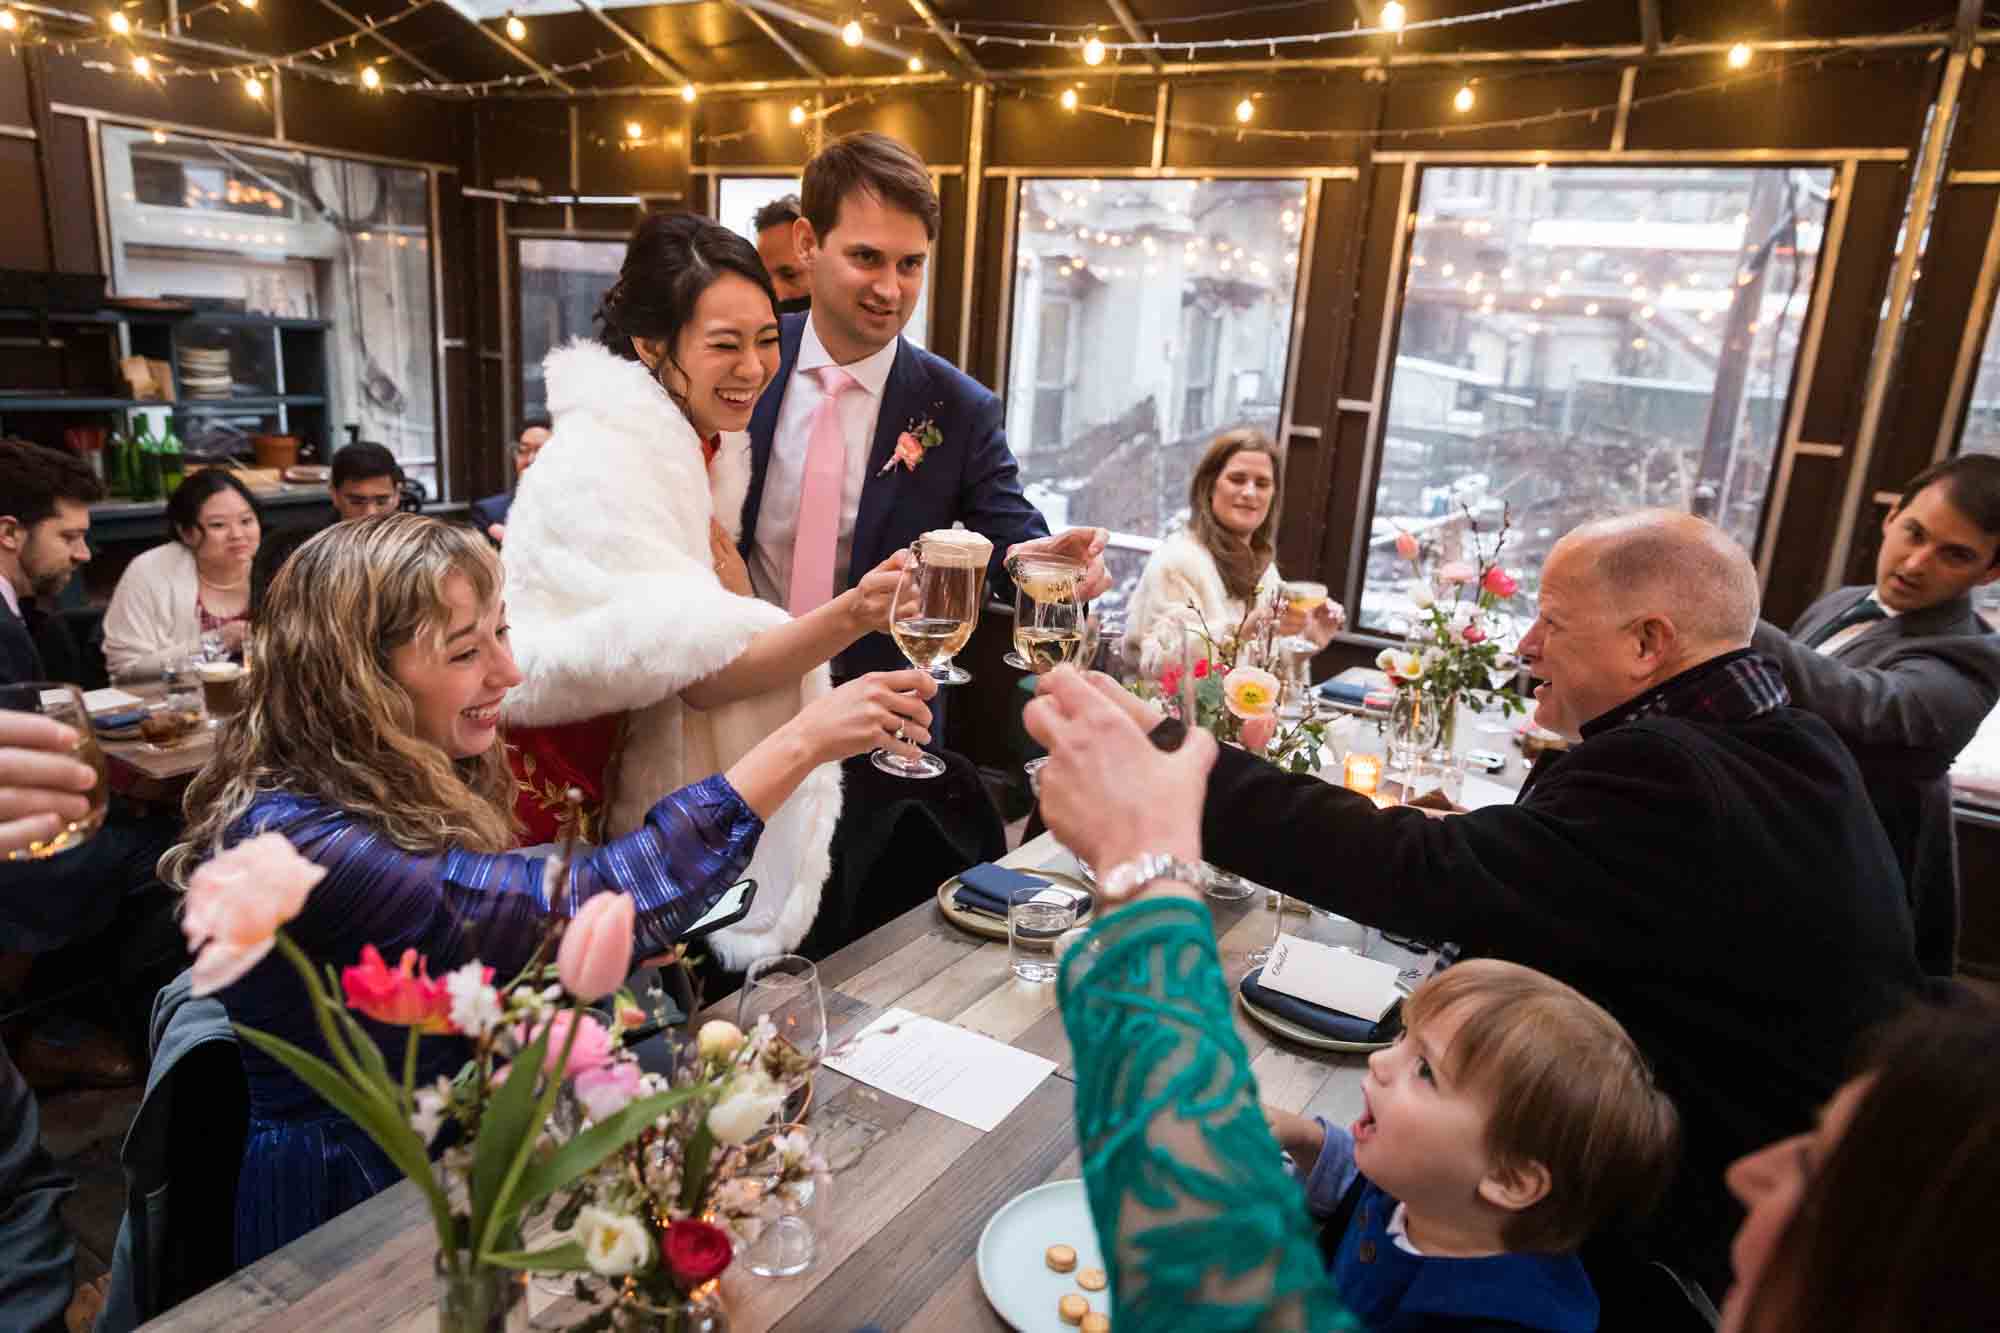 Guests toasting with glasses at a Brooklyn restaurant wedding